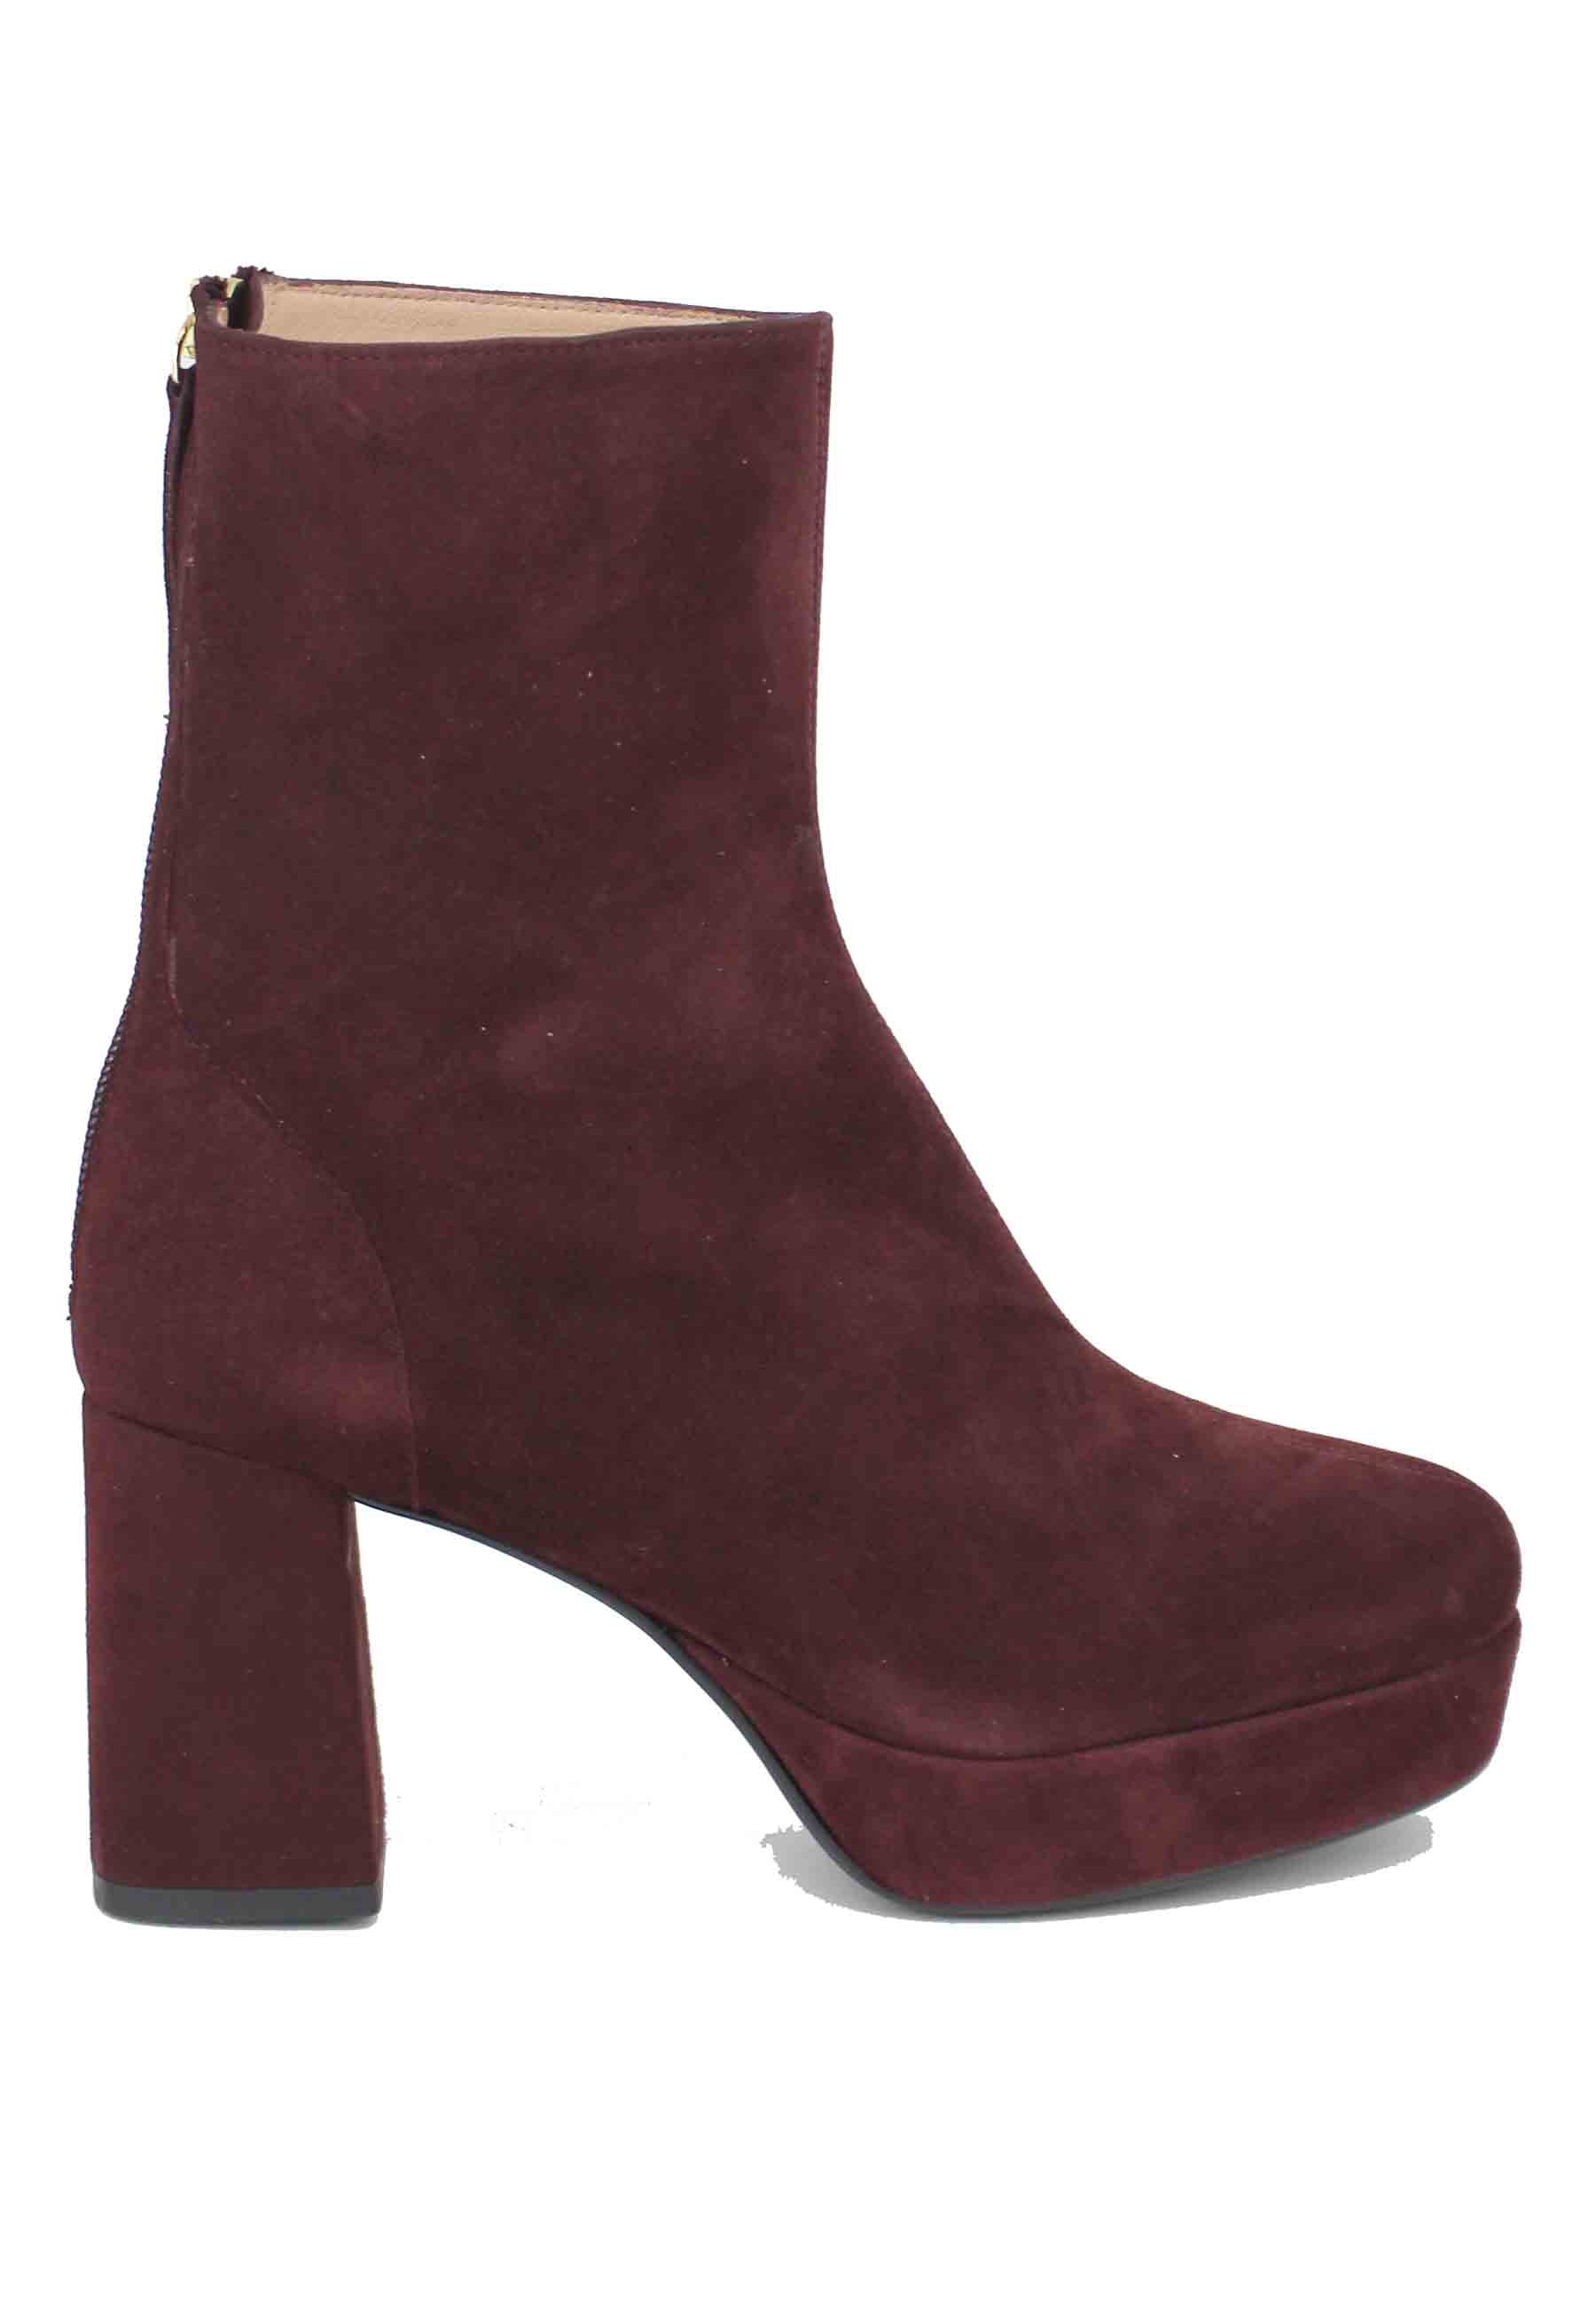 Women's ankle boots in burgundy suede with heel and plateau